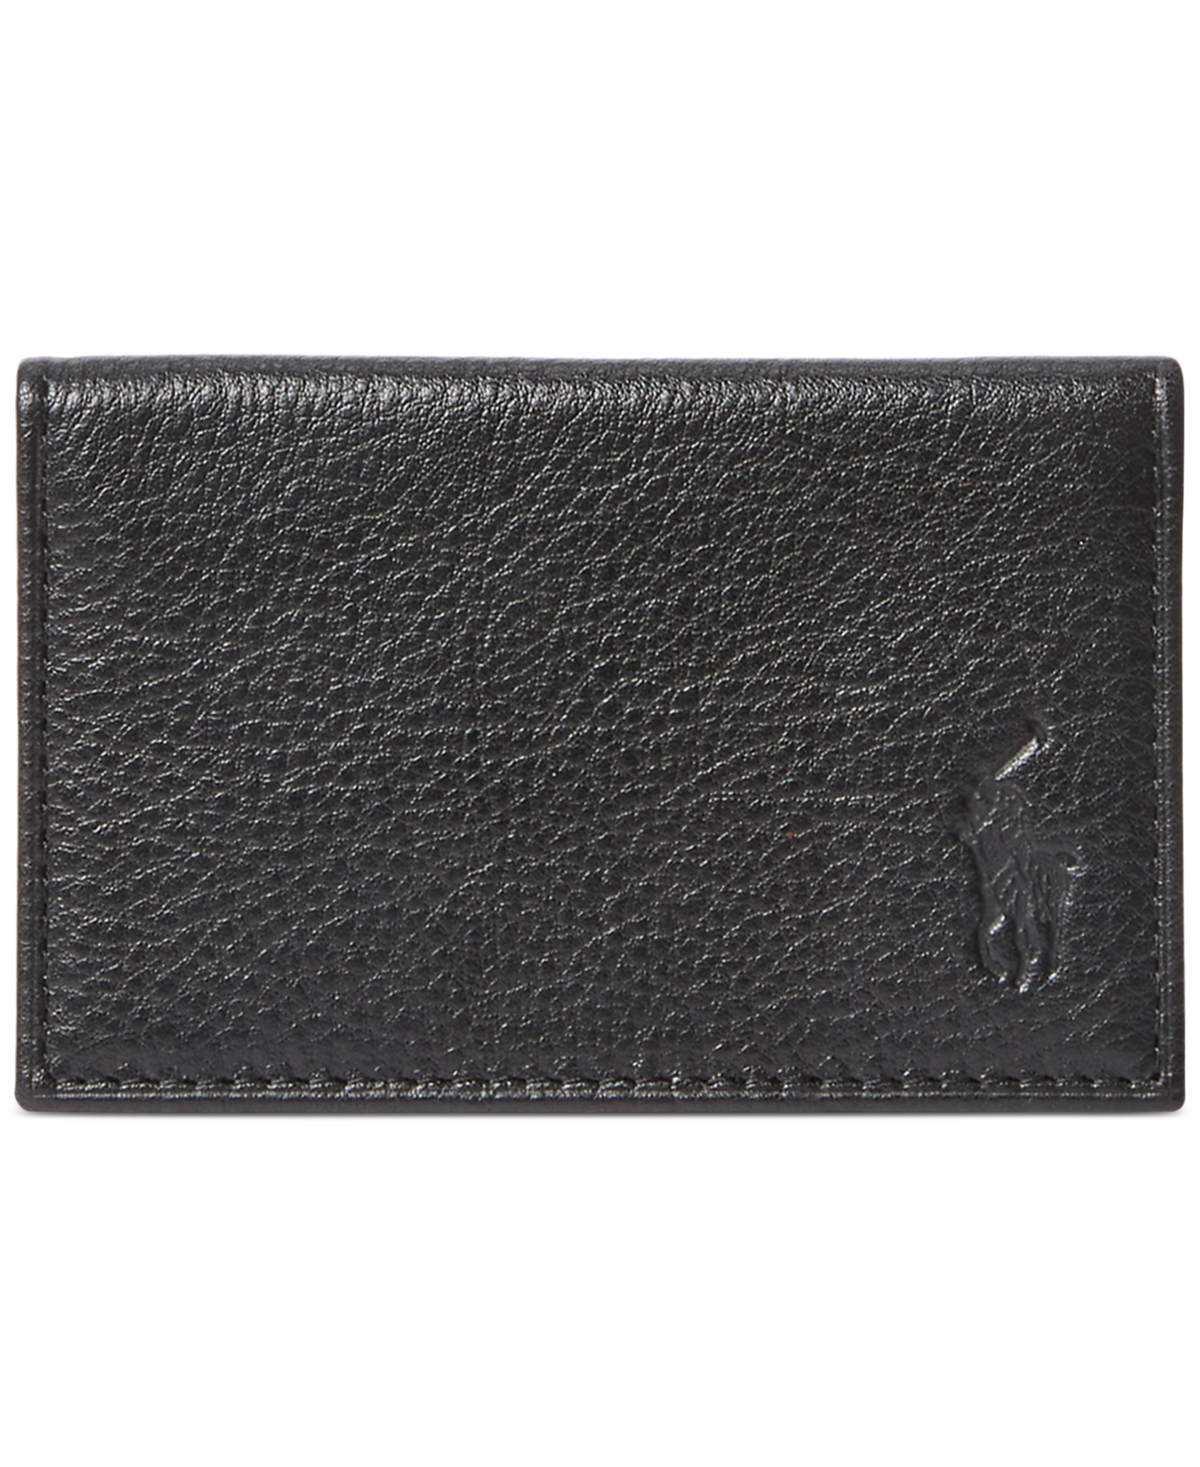 Polo Ralph Lauren Pebbled Leather Card Wallet In Black